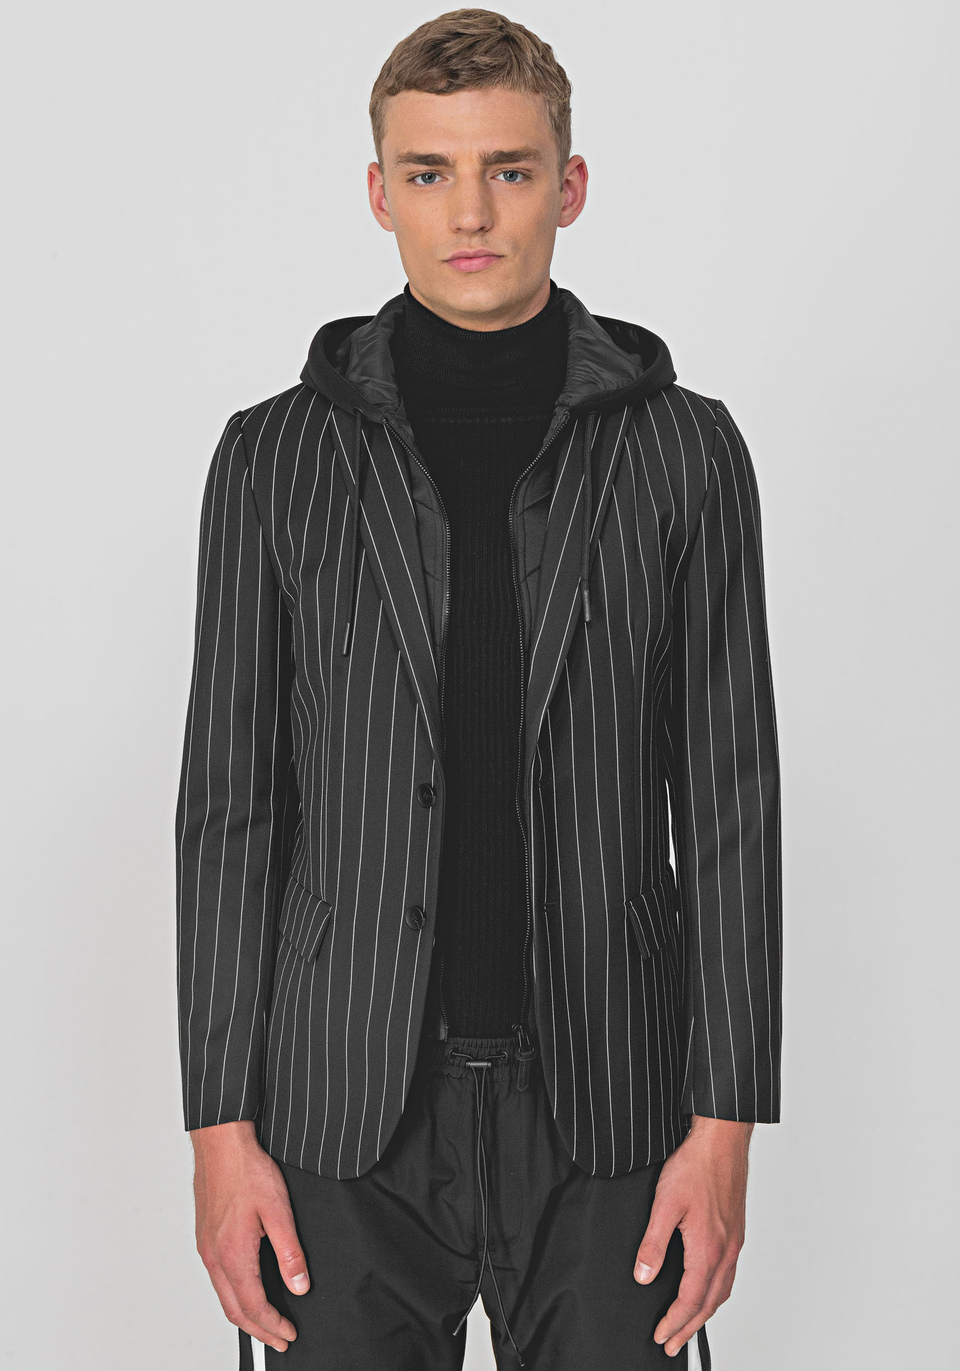 SINGLE-BREASTED SLIM-FIT JACKET IN A PINSTRIPE TWILL WITH A REMOVABLE VEST - Antony Morato Online Shop